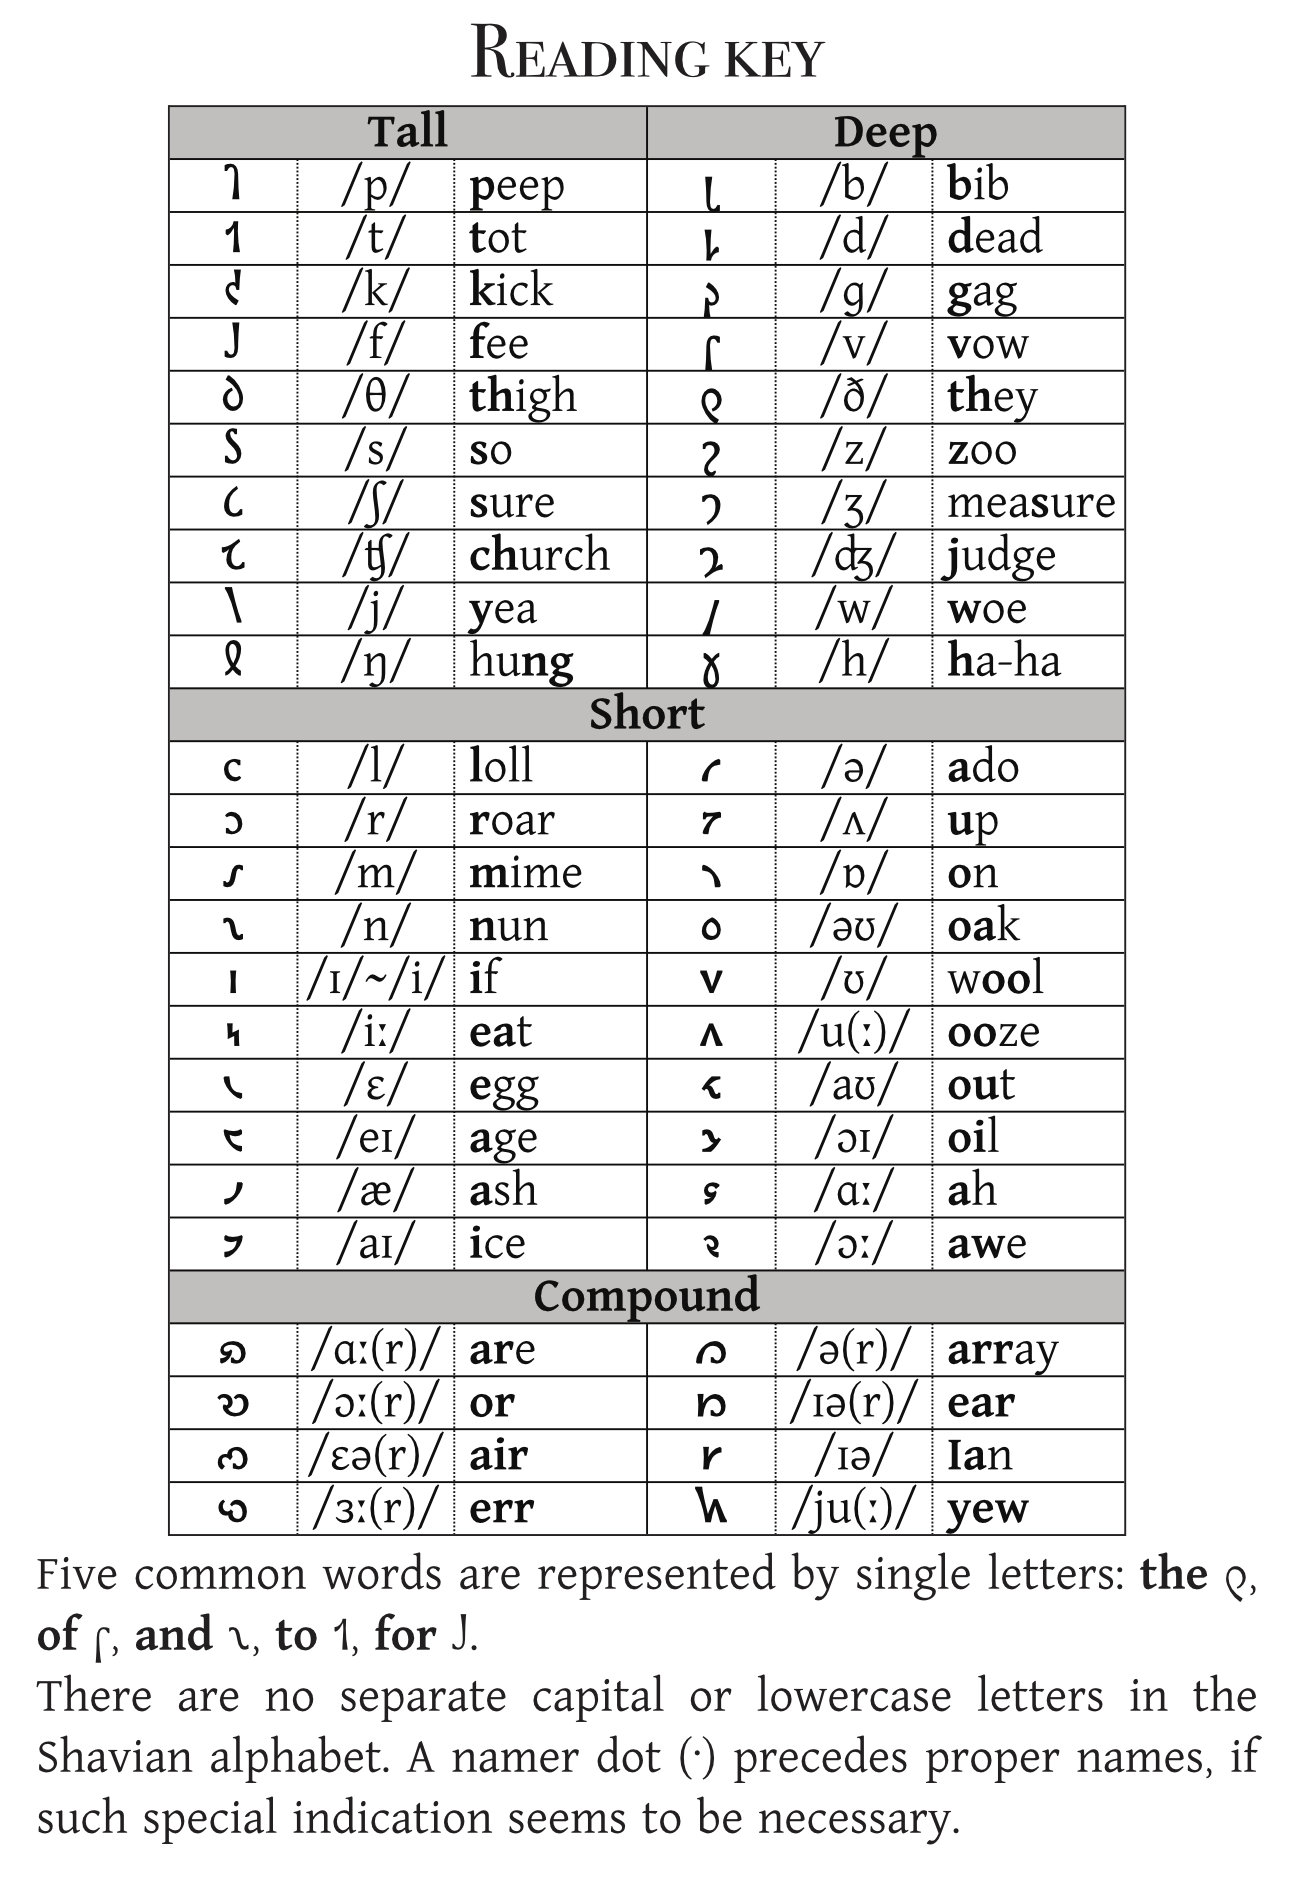 A table of Shavian alphabet letters and the sounds they represent.